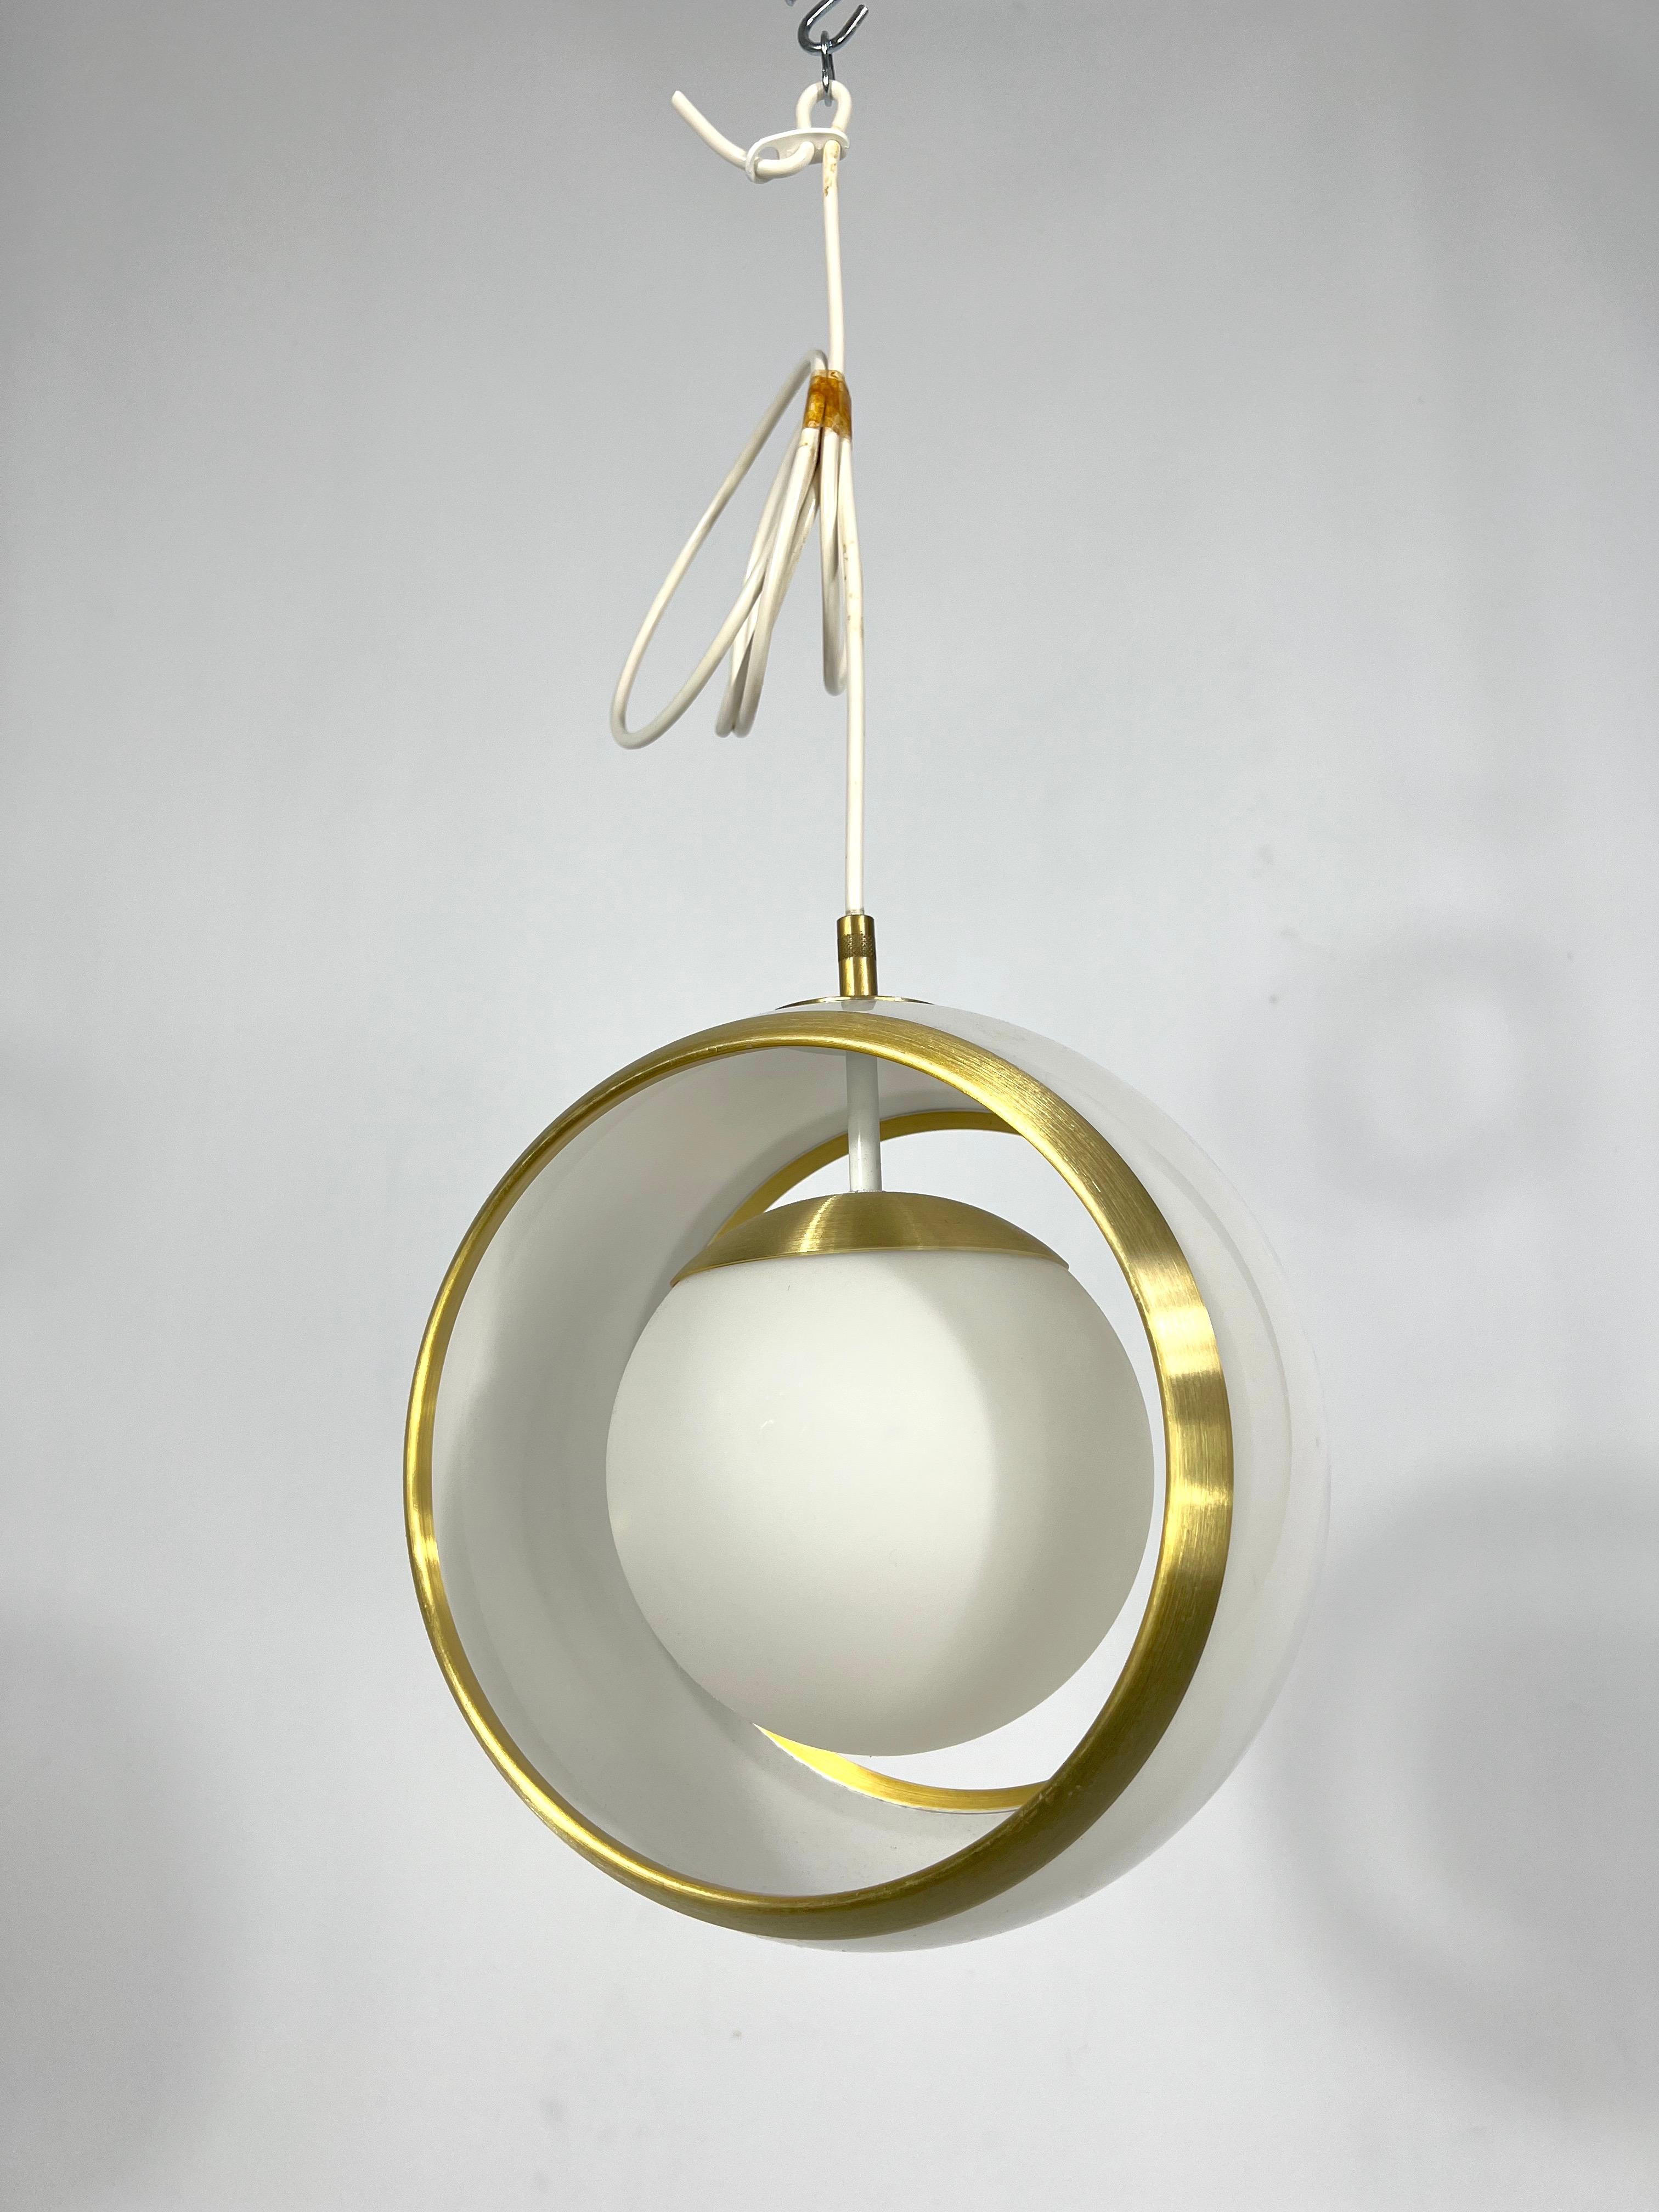 Stilux Milano, Gilded Aluminum, Opaline and Perspex Pendant, Italy, 1960s For Sale 2